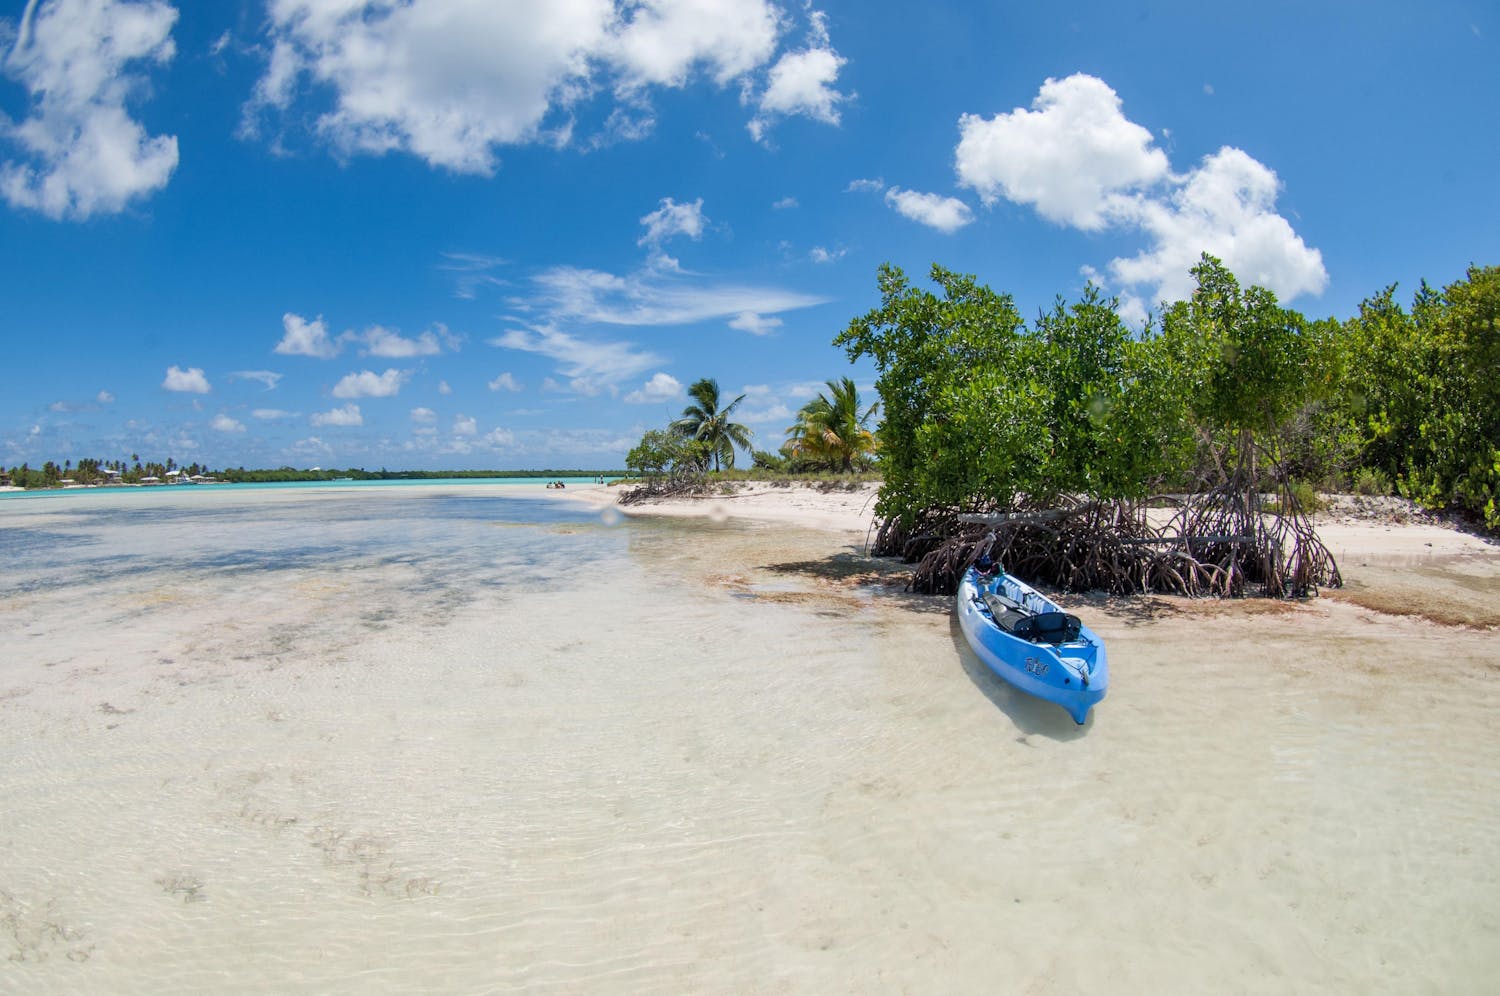 Beachy view of Sand Cay at Little Cayman with a blue kayak